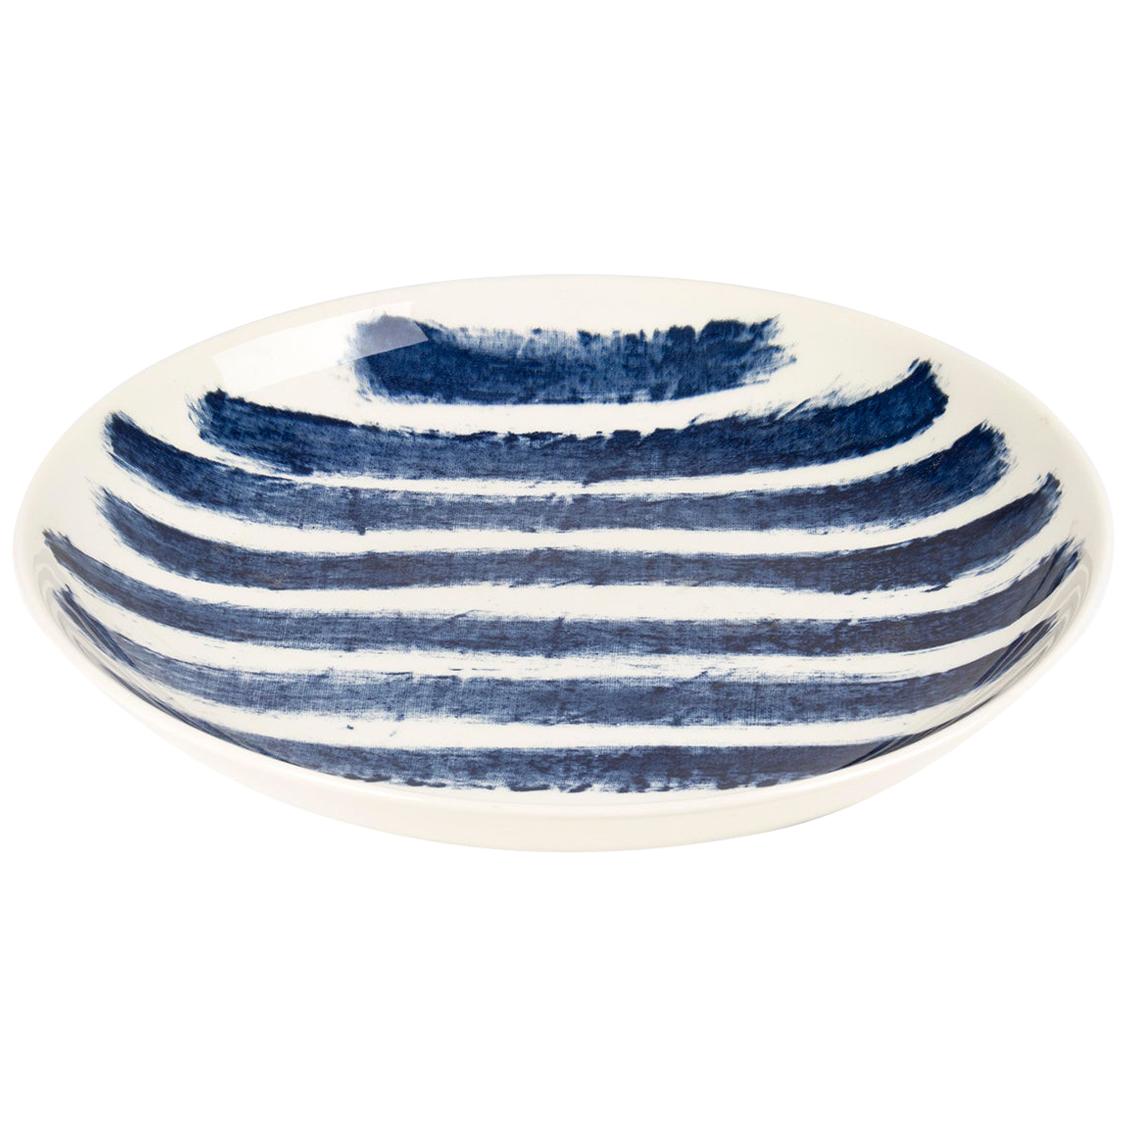 Contemporary Earthenware Pasta Bowl with Classic Tones of English Delftware